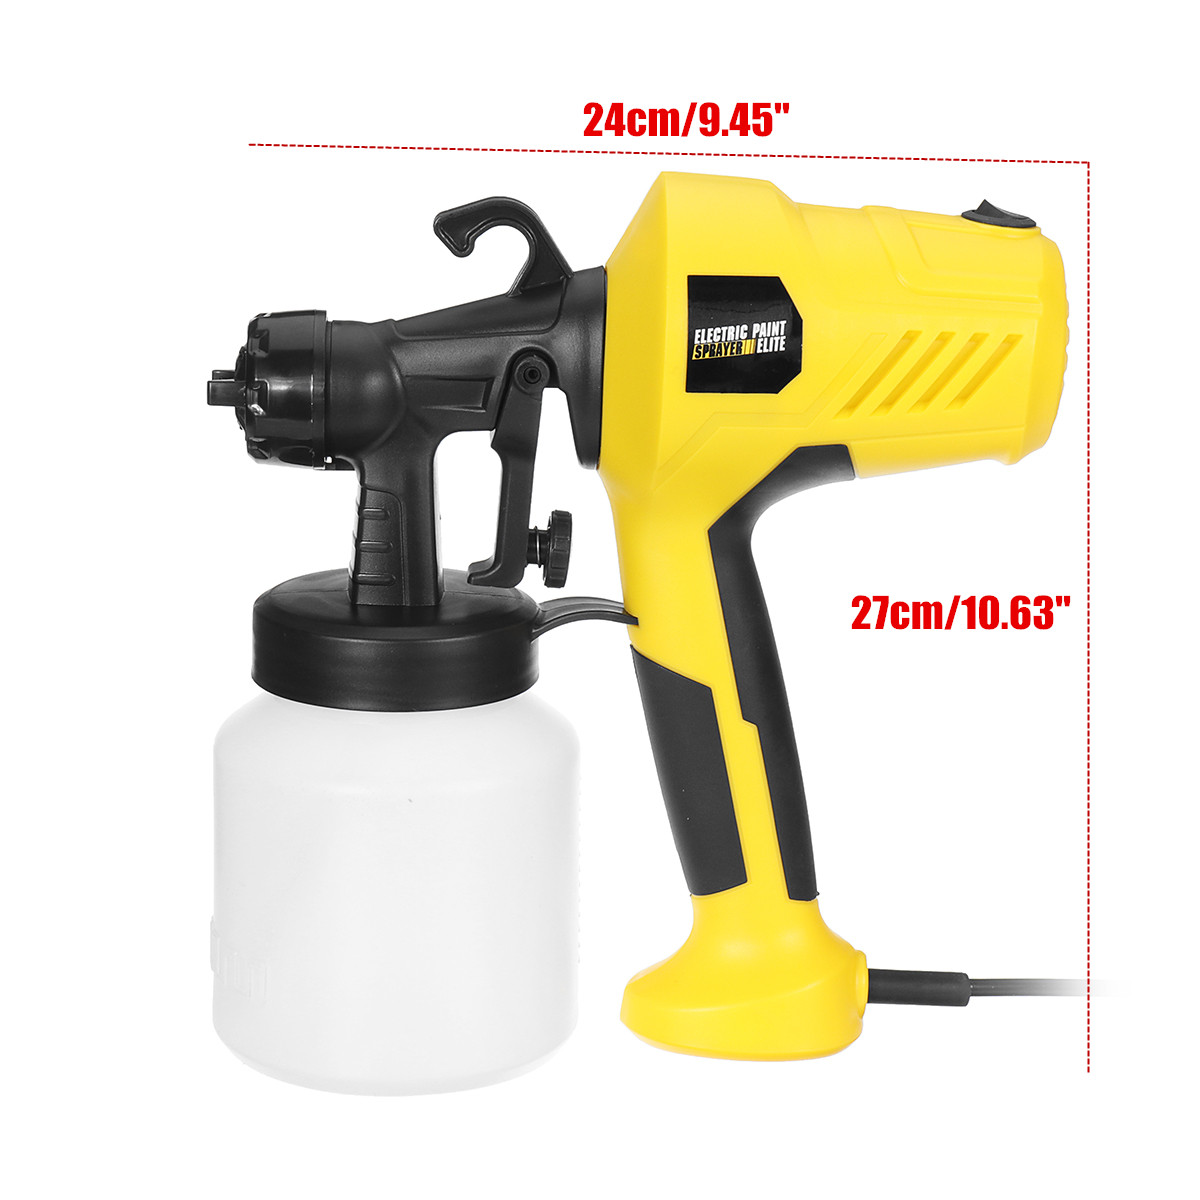 600W Electric Spray Paint Sprayer For Cars Wood Furniture Wall Woodworking 25